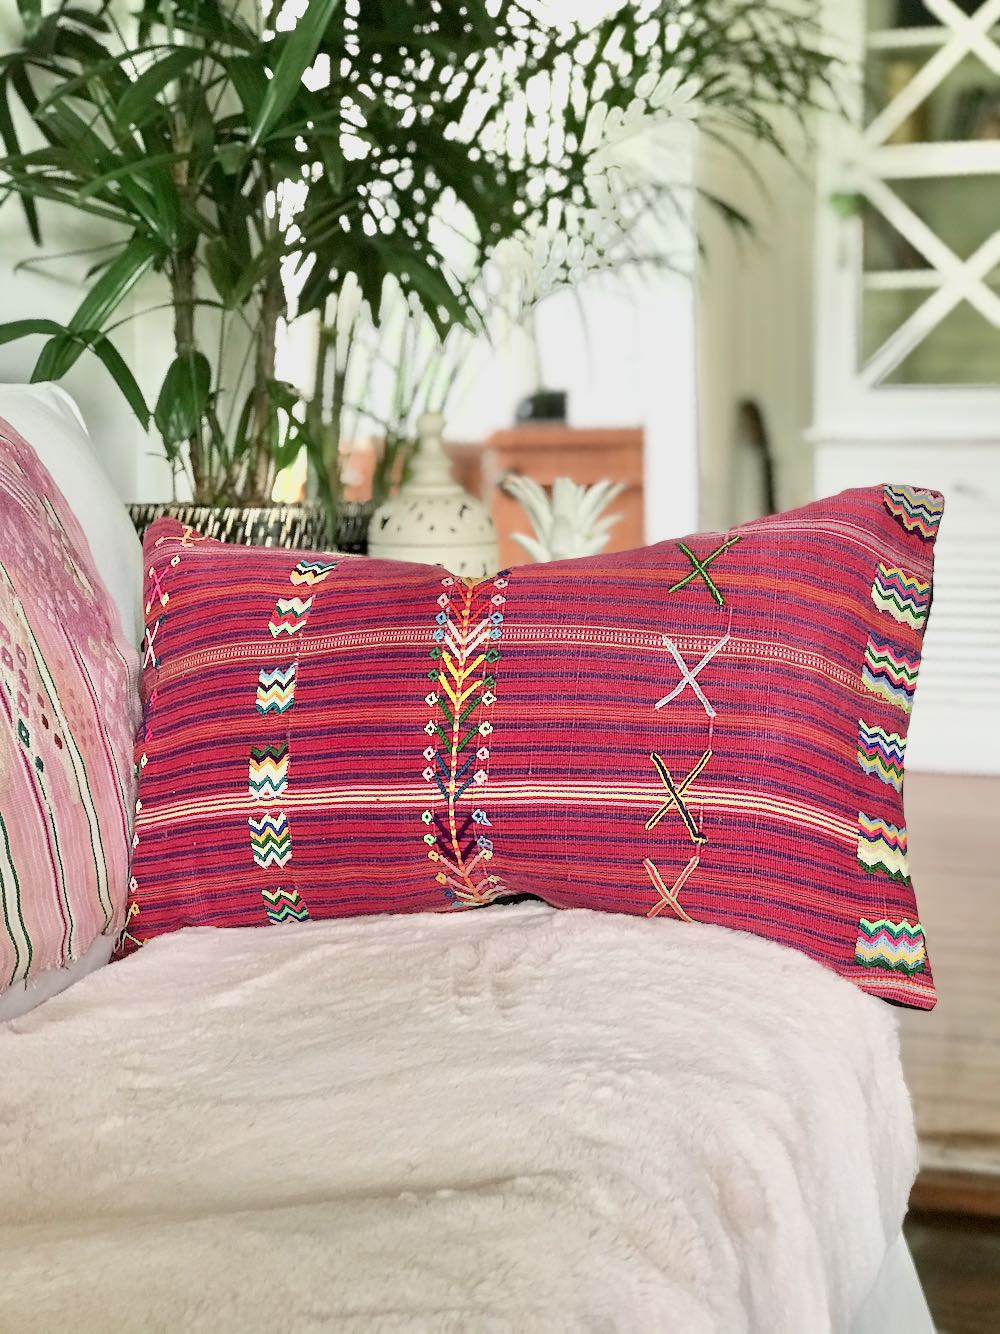 Guatemalan Textile Pillow, vintage, hand woven pink and purple embroidered striped cushion from Colotenango